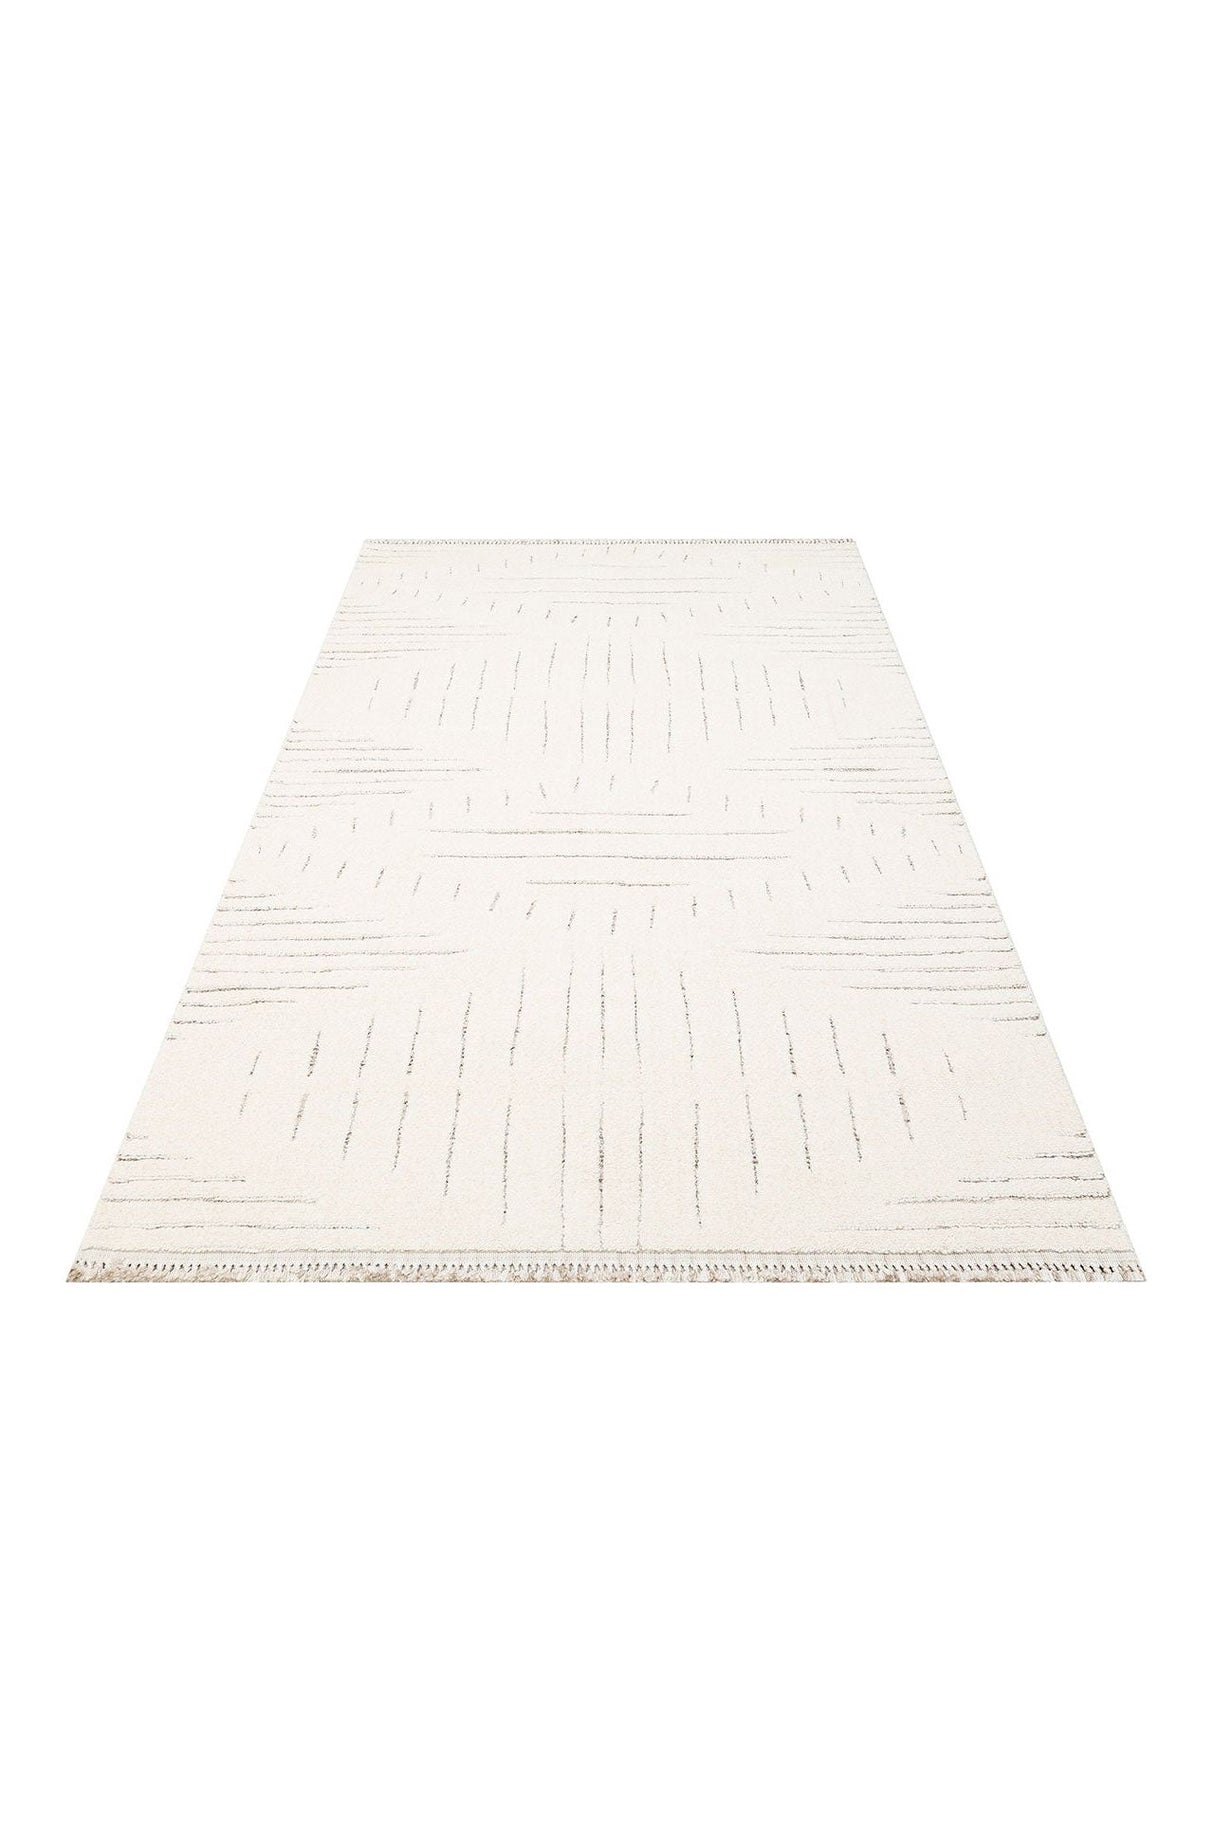 Modern Machine Made Rugs With Extremely Soft Texture Bhm 02 White Black